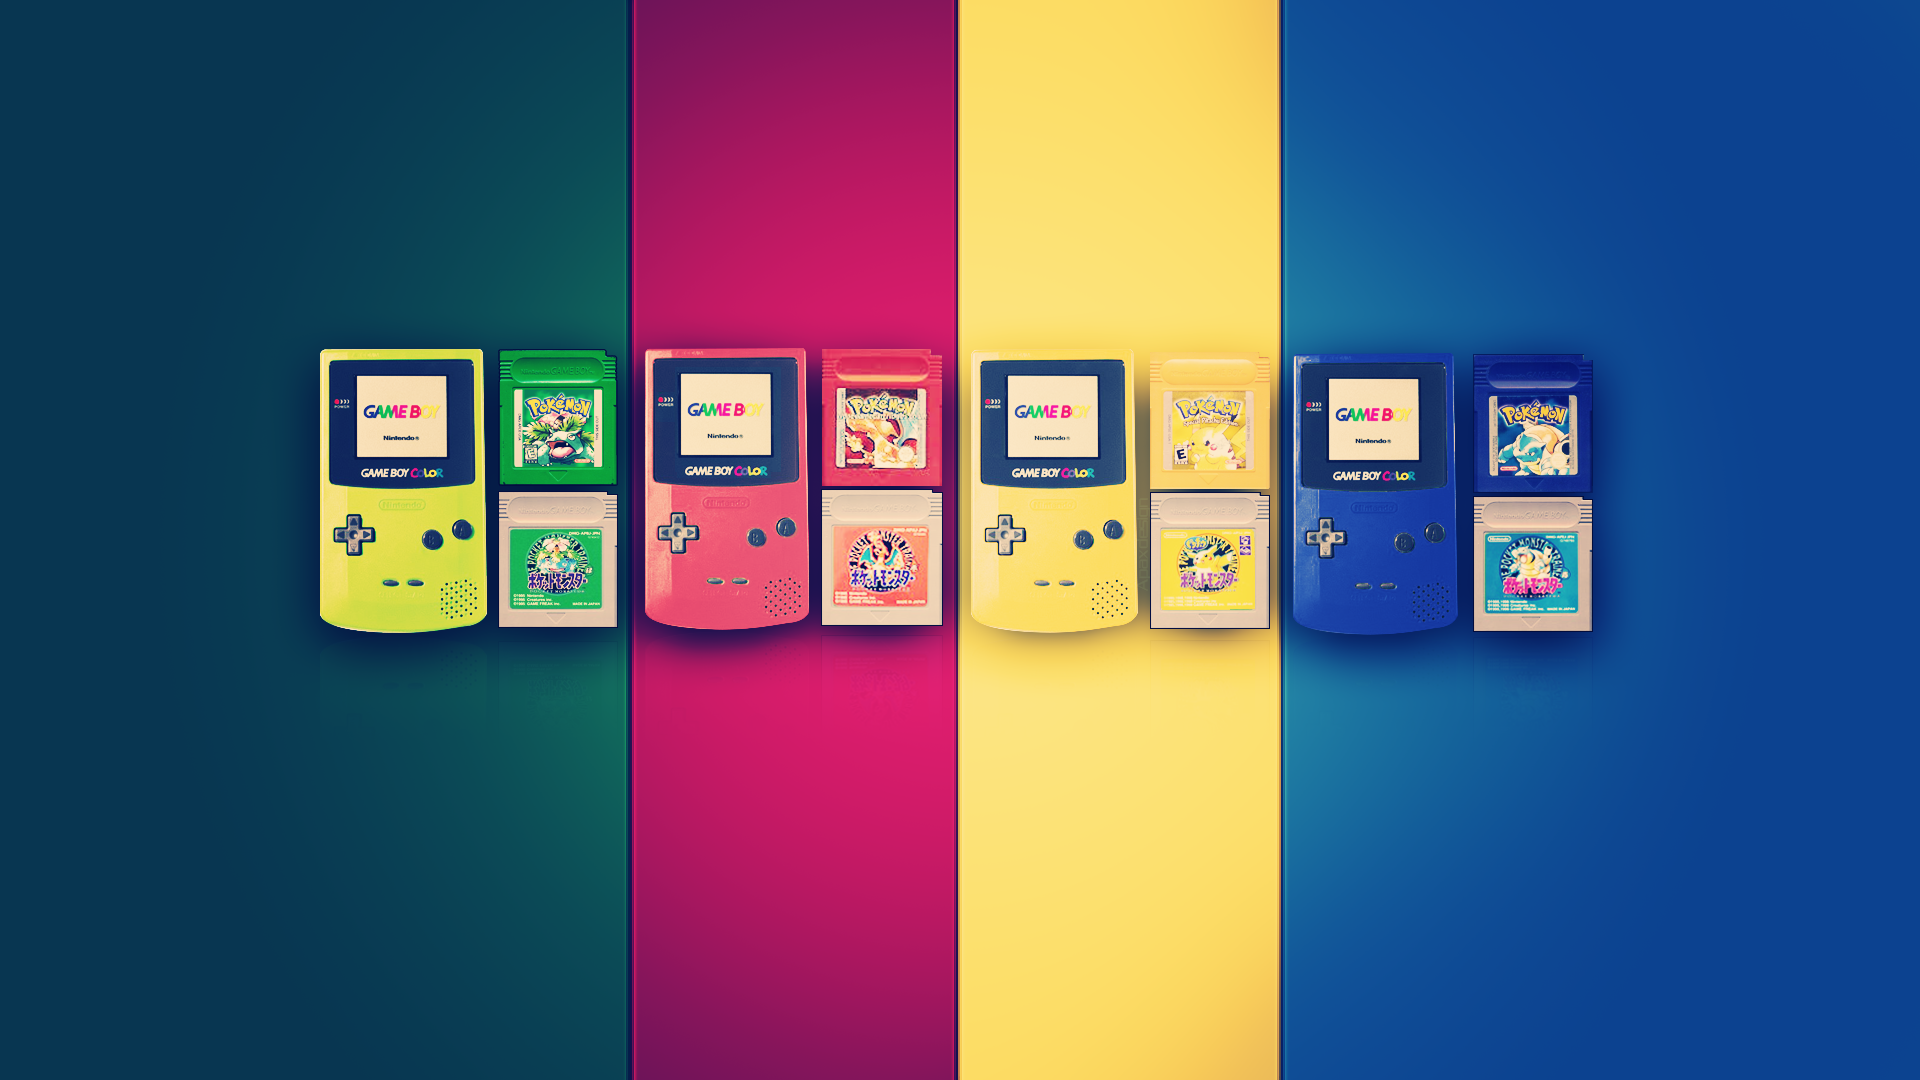 A colorful HD desktop wallpaper featuring a row of Game Boy consoles against a vibrant multicolored background.